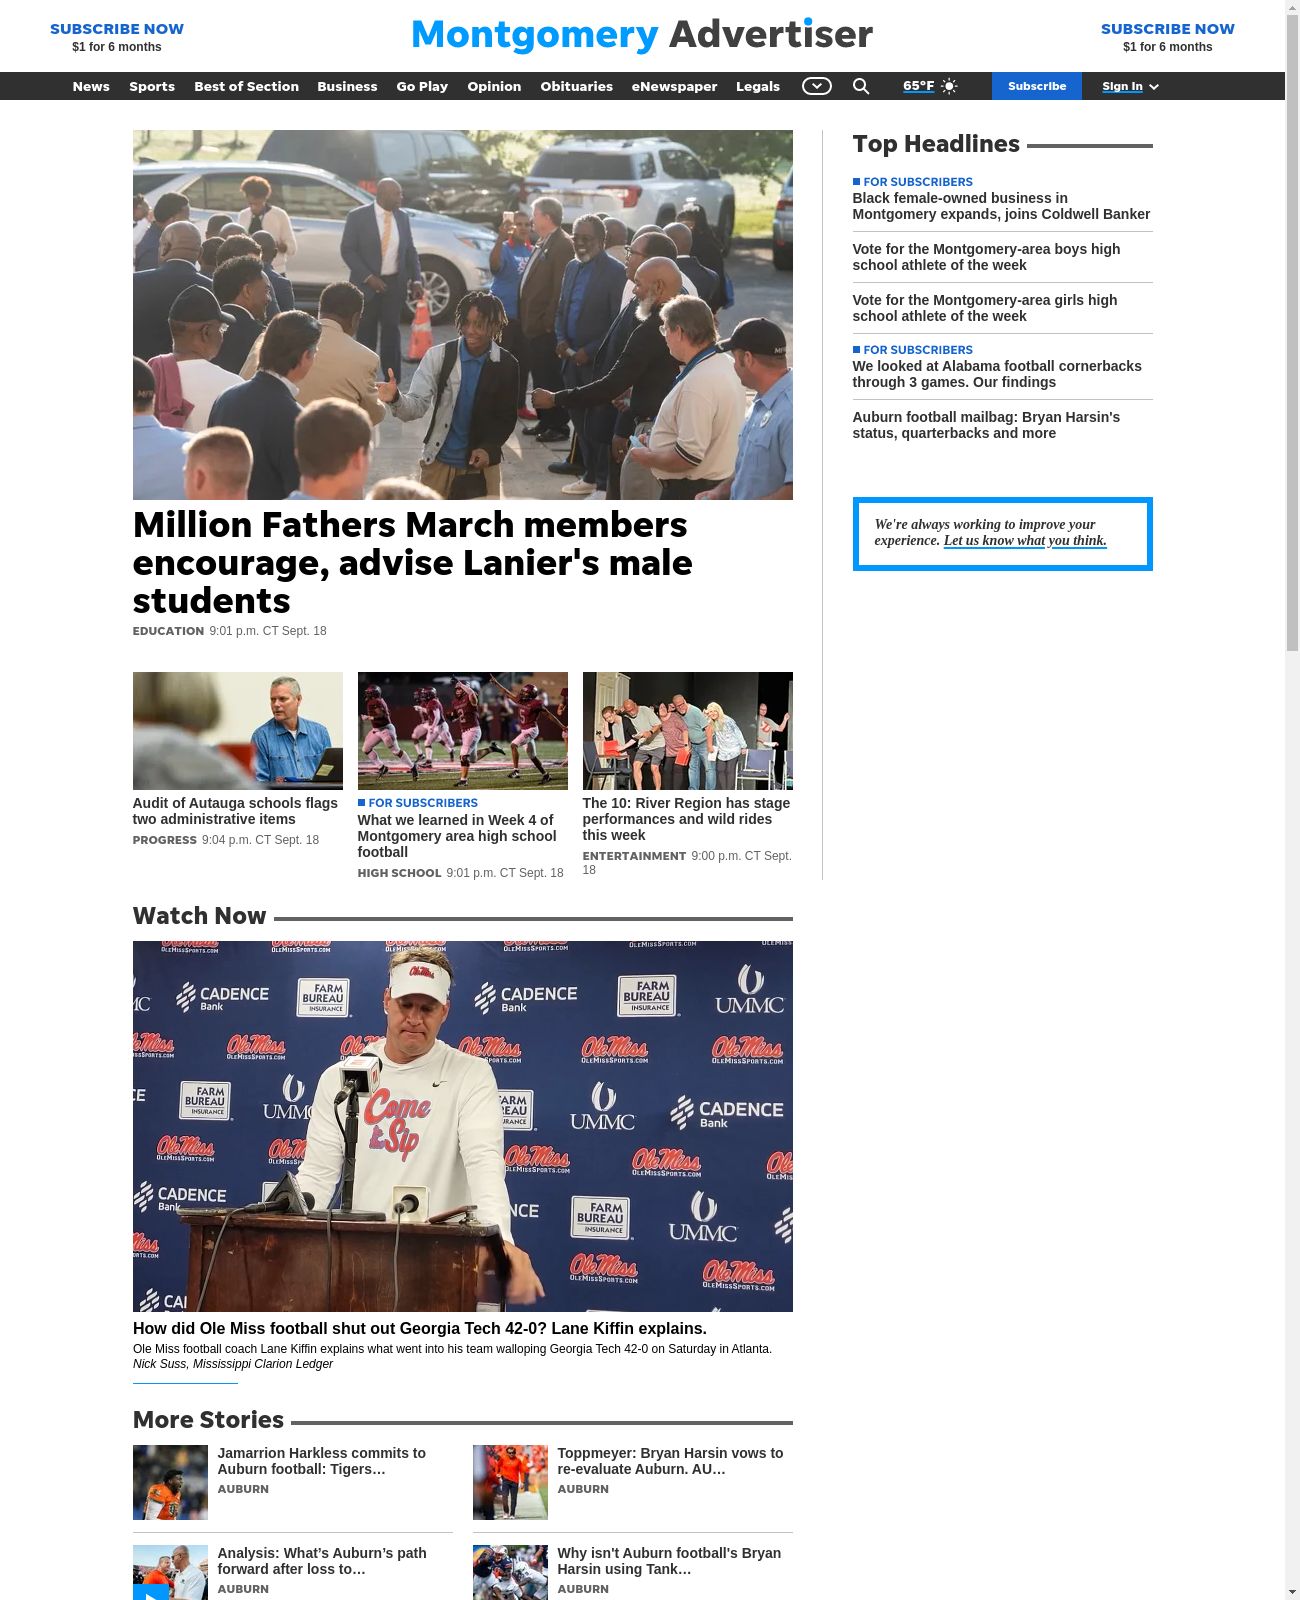 Montgomery Advertiser at 2022-09-19 07:56:40-05:00 local time